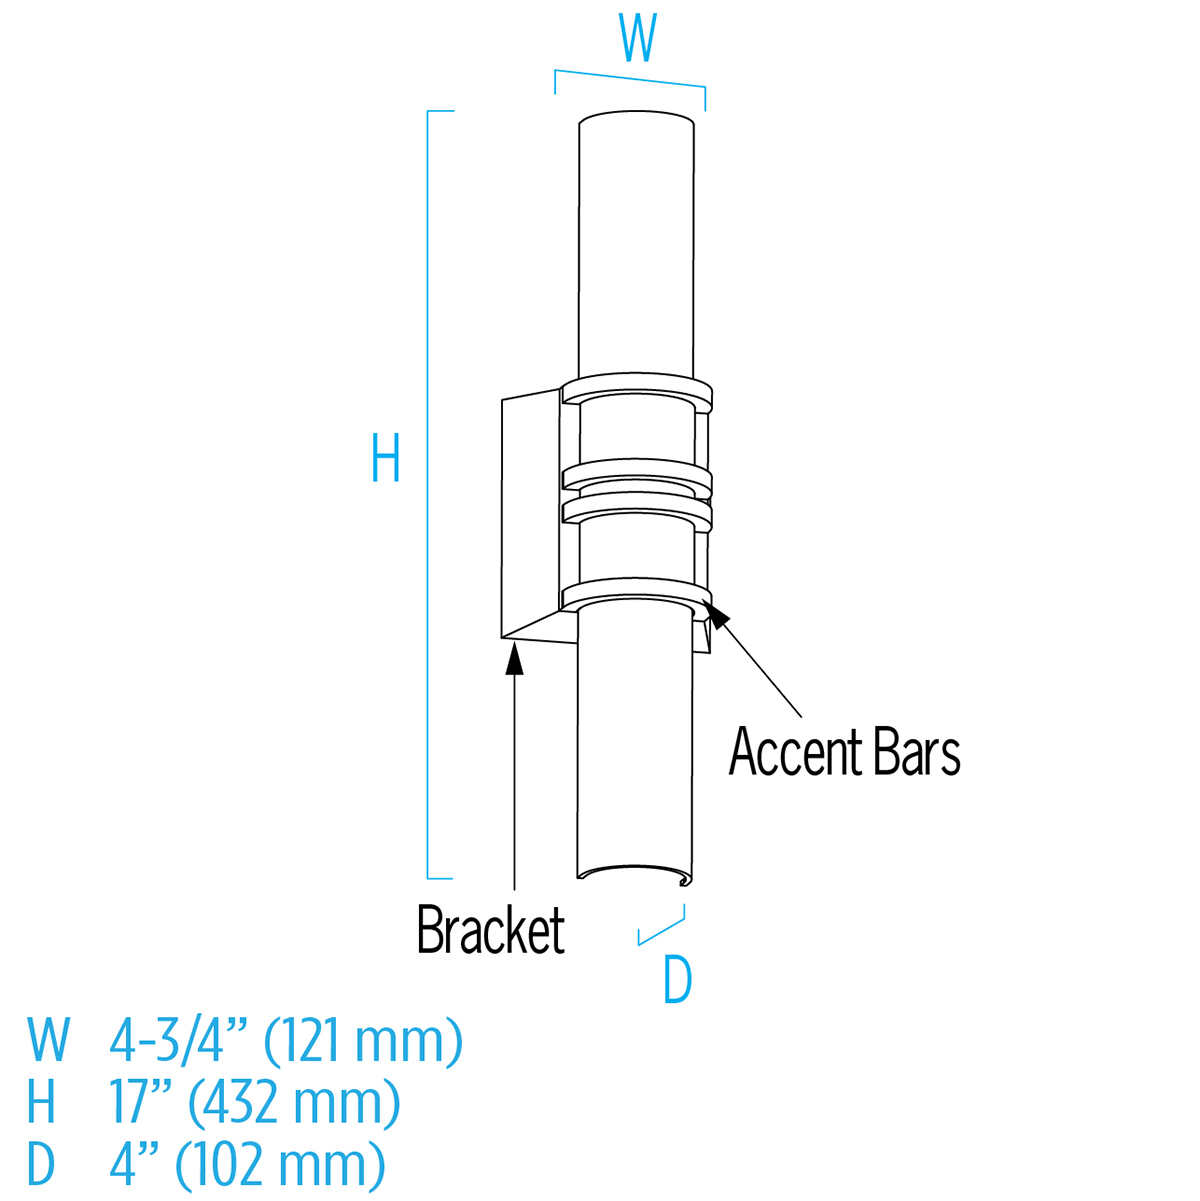 ISO drawing and dimensions for Mini Colonnade CB5112